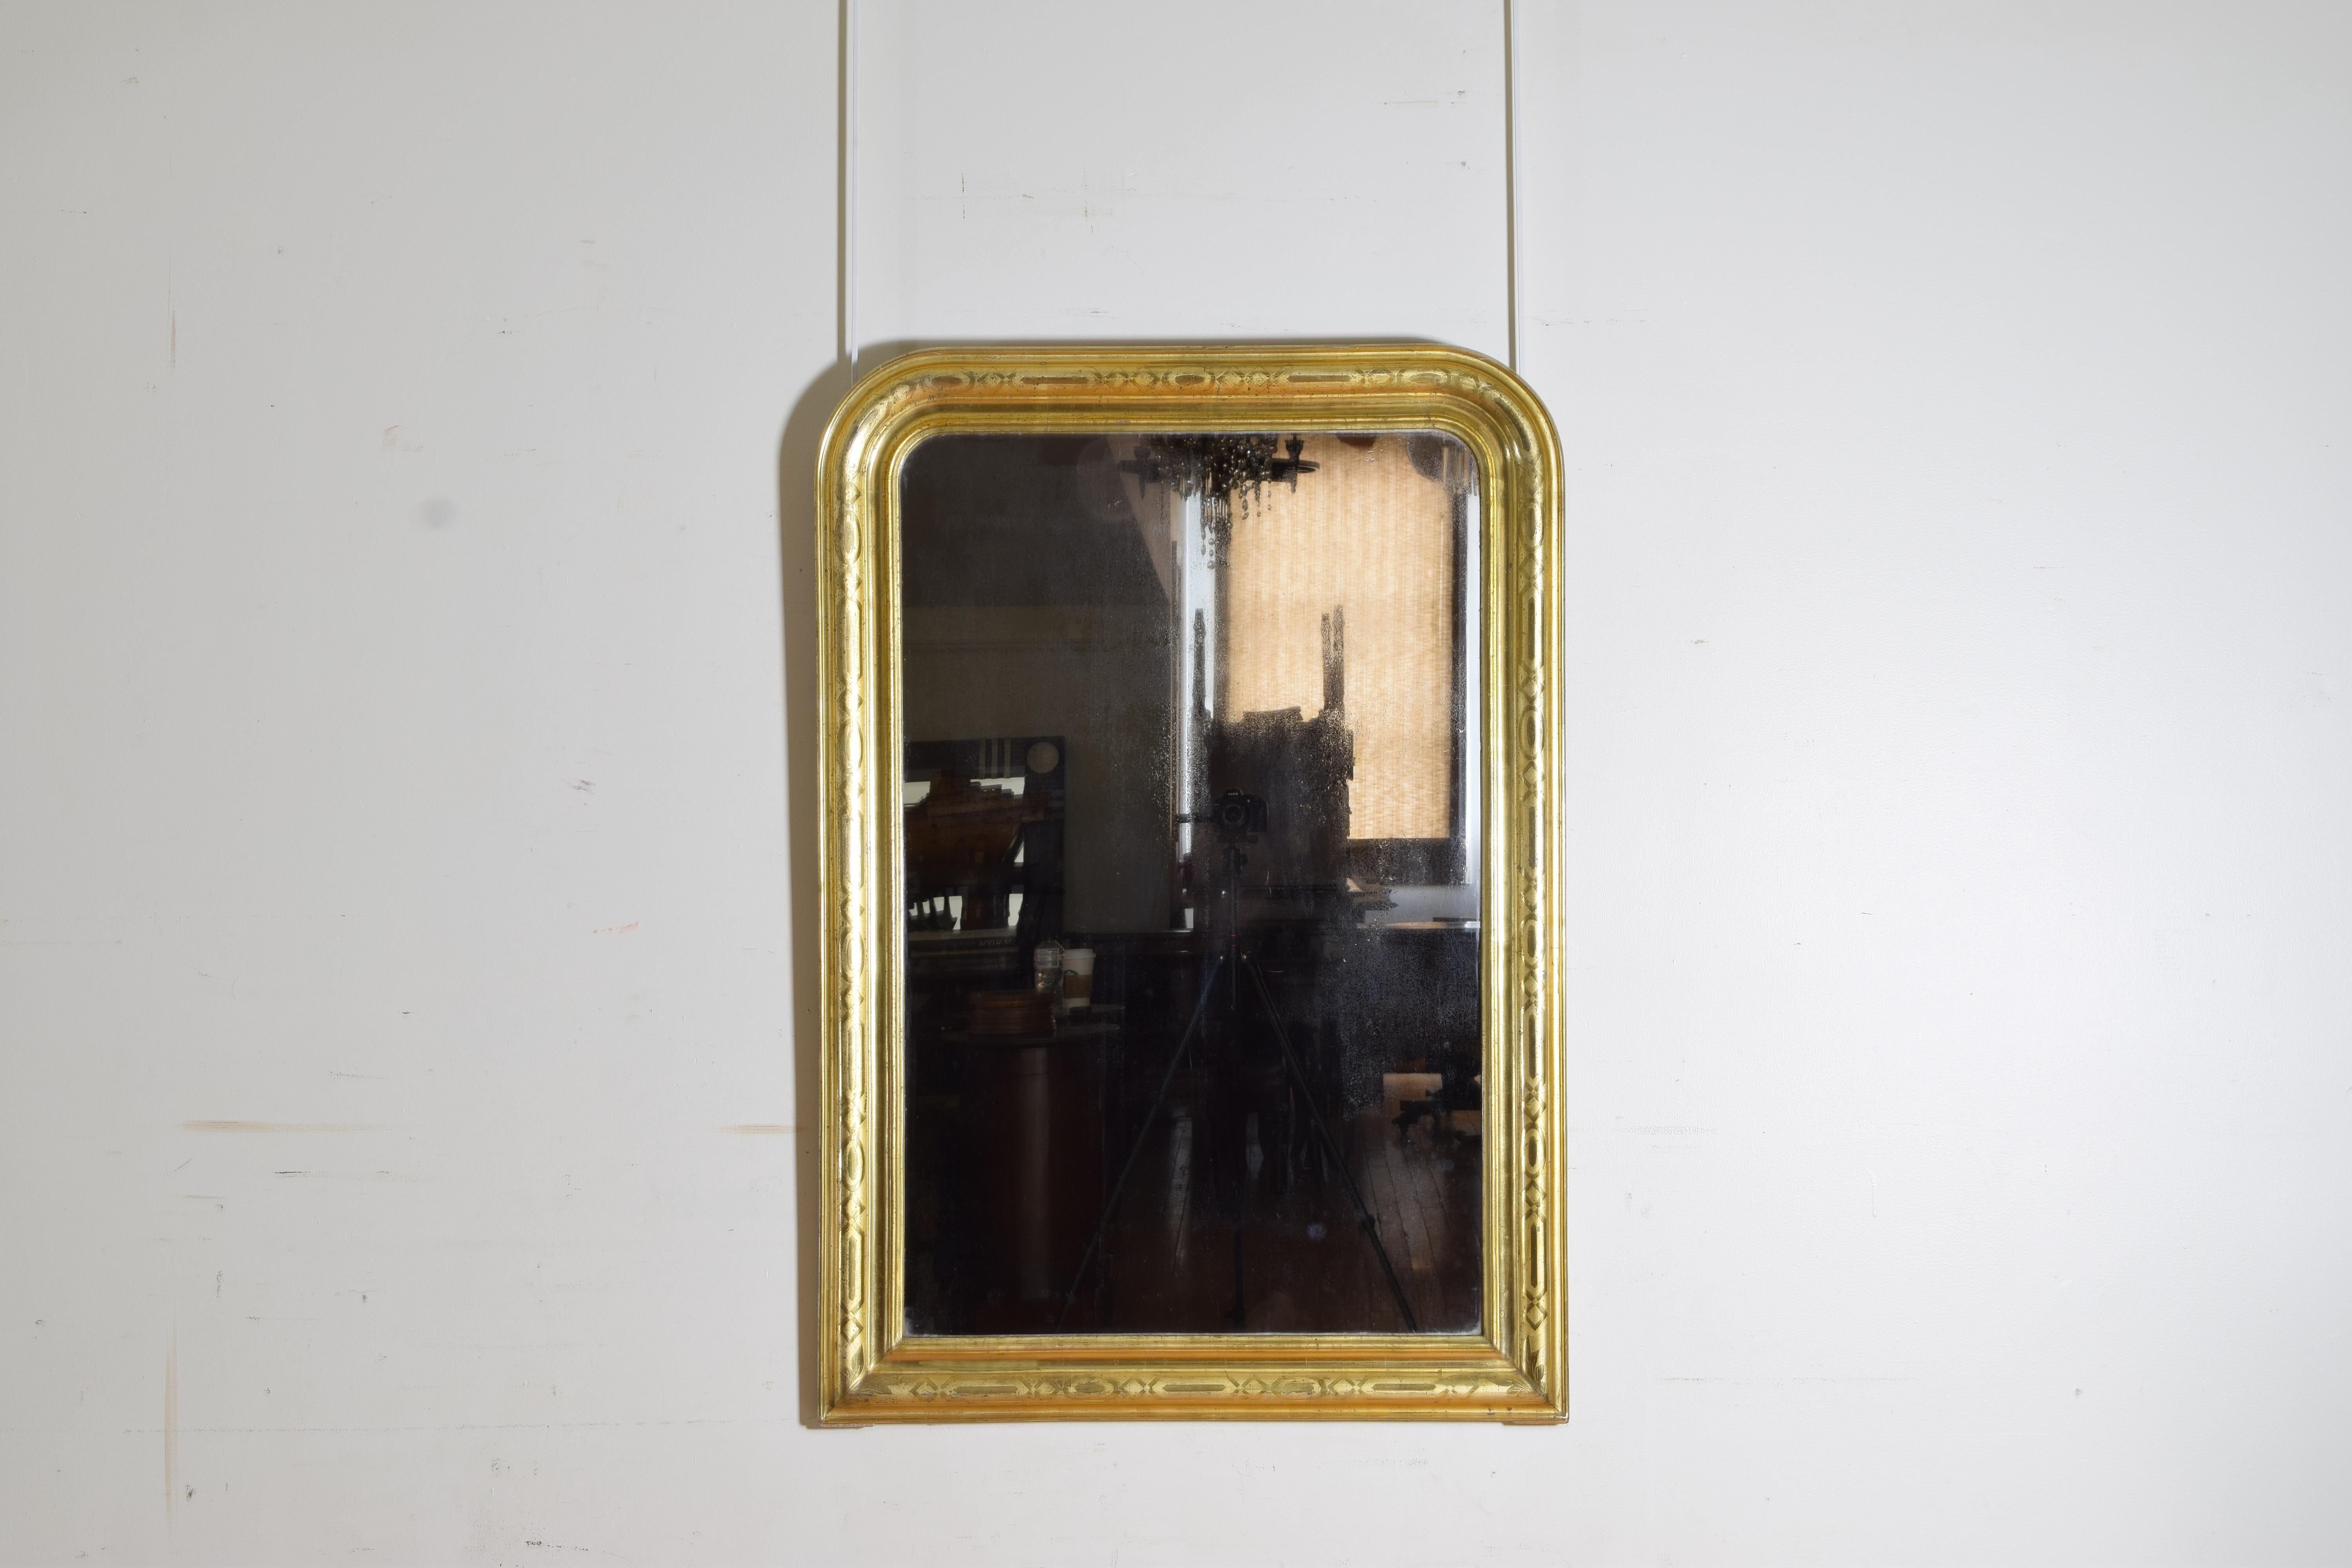 The rectangular frame with rounded top corners with raised moldings creating layers the highest molding with lozenge and oval shaped stencils of 23k gold, retaining original mirror plate and wooden backing, second quarter of the 19th century.